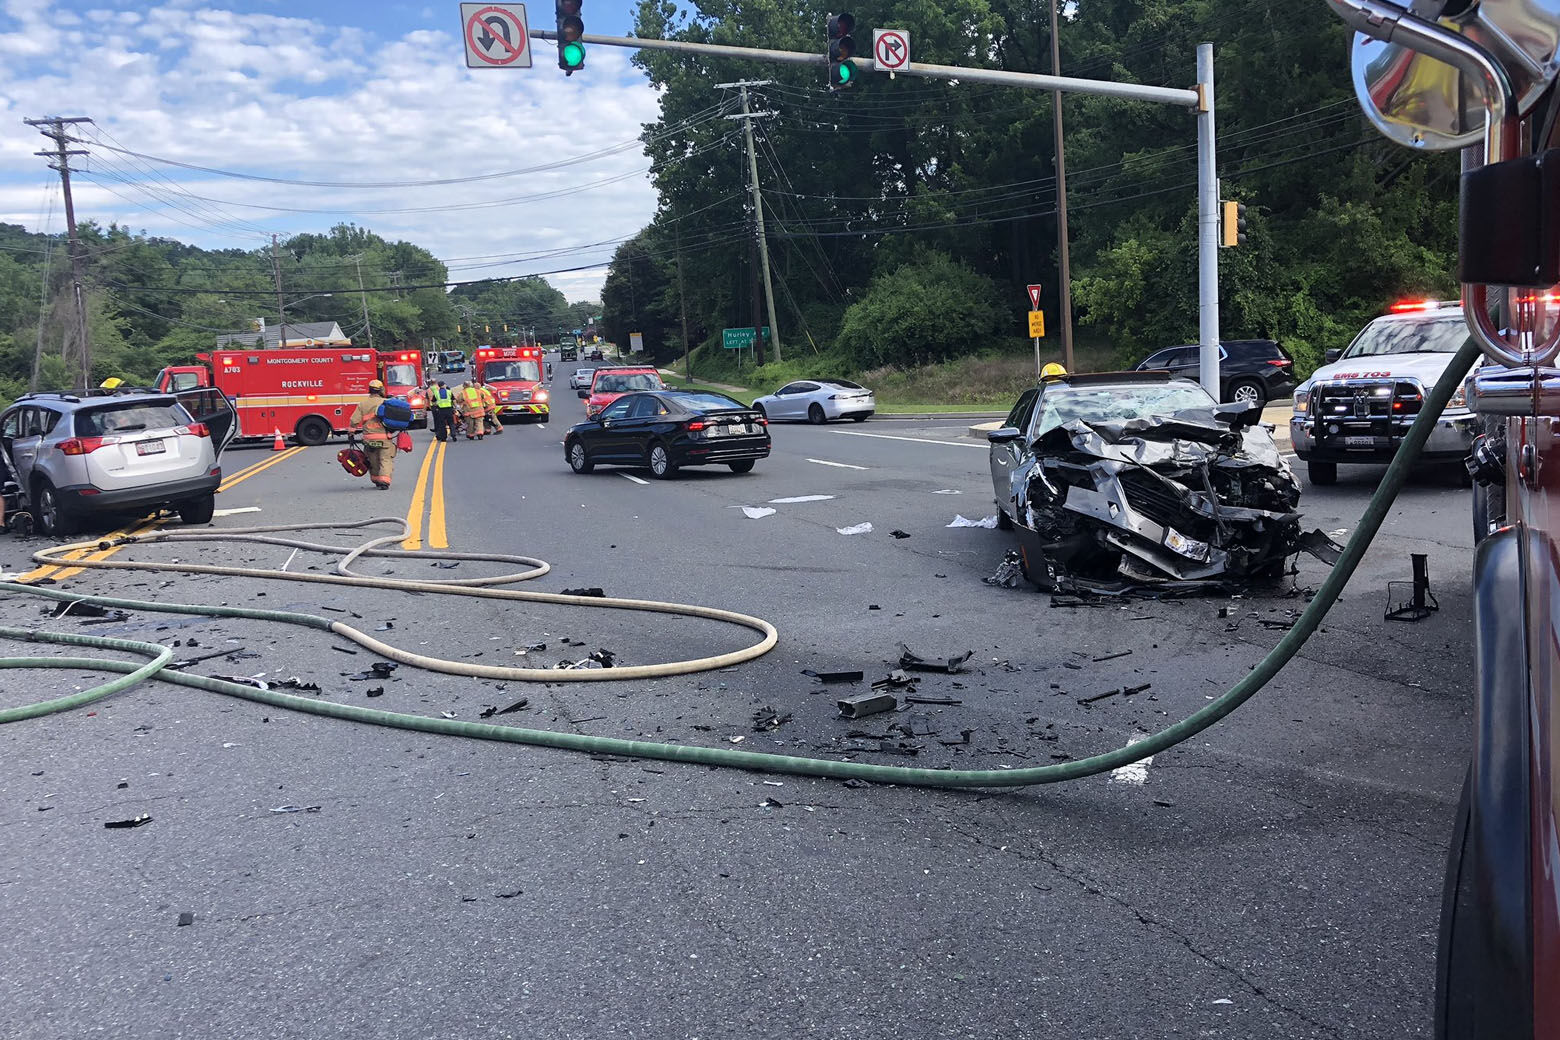 The crash happened just after 9 a.m. Tuesday when two vehicles apparently collided and then two subsequent vehicles crashed into the initial wreck, according to the Montgomery County Fire and Rescue Service. (Courtesy Montgomery County Fire and Rescue Service)